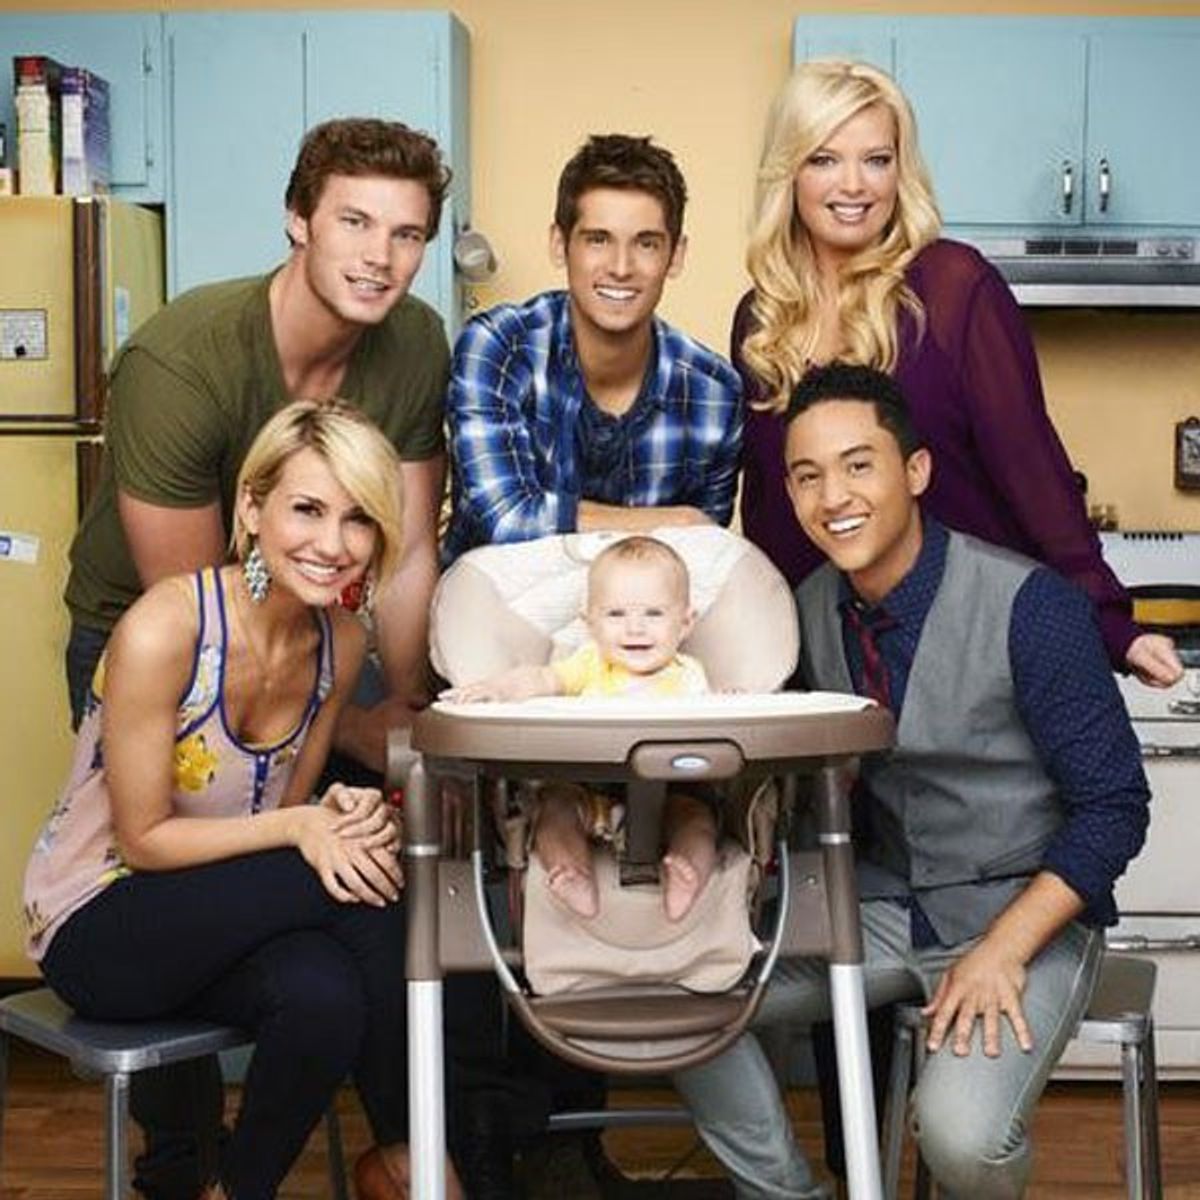 Why You Should Watch "Baby Daddy"